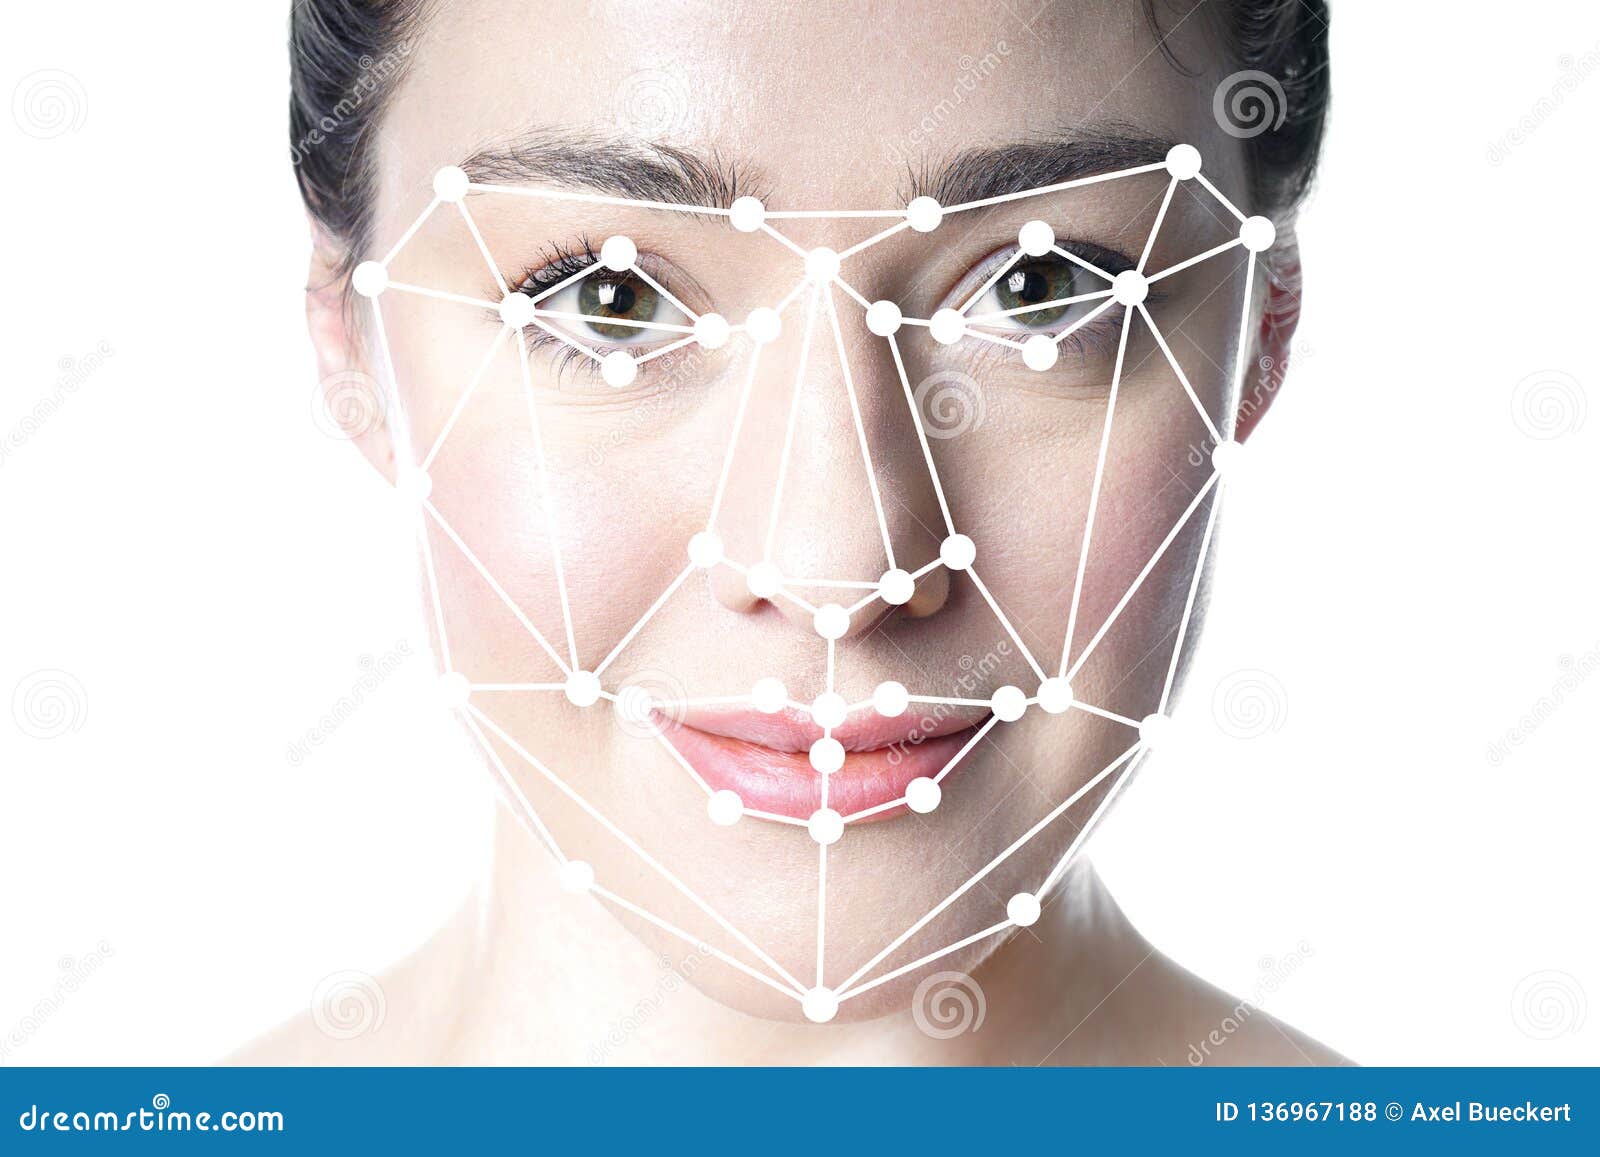 face detection or facial recognition grid overlay on face of woman